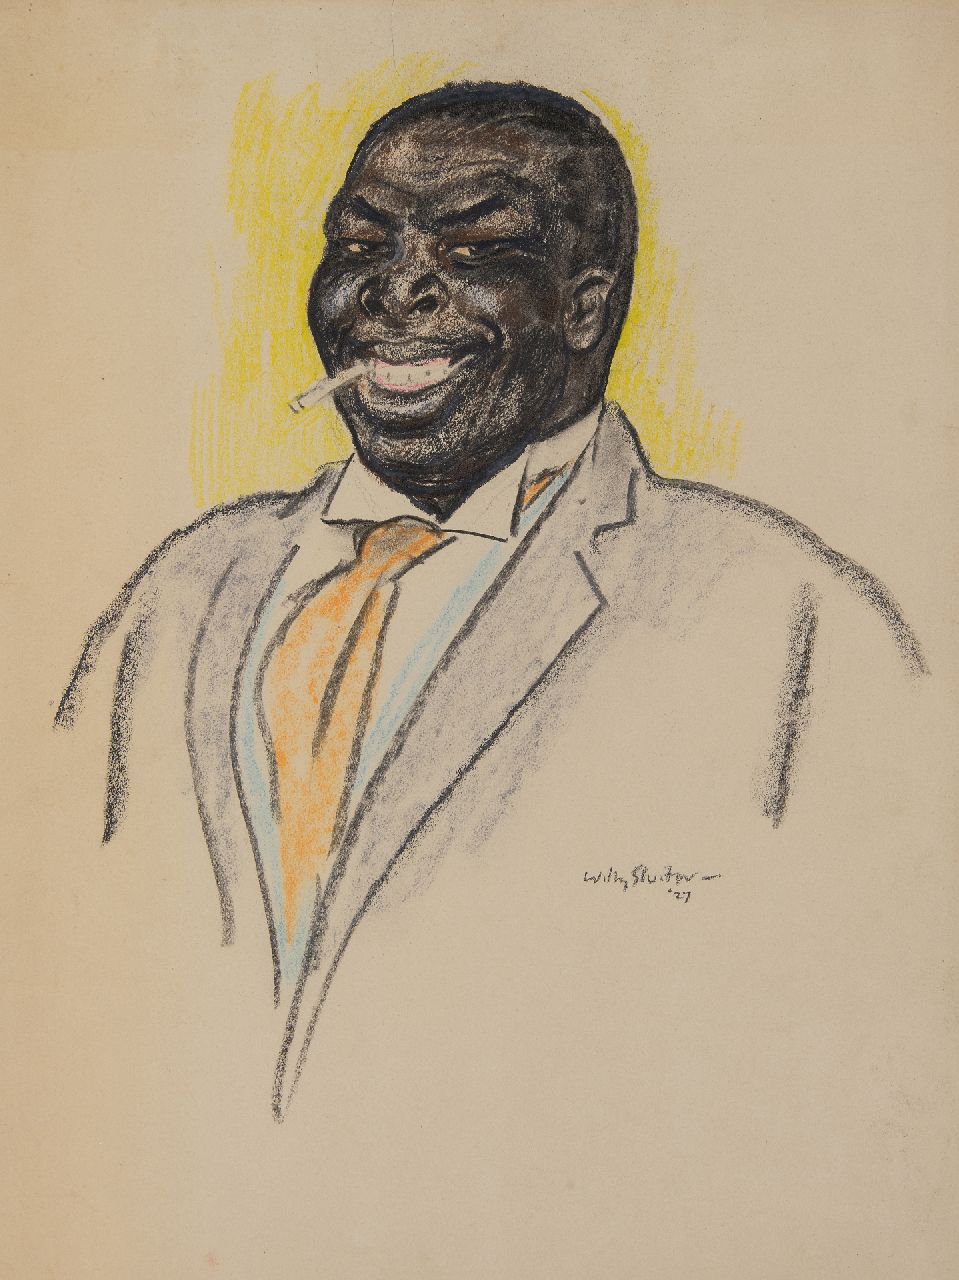 Sluiter J.W.  | Jan Willem 'Willy' Sluiter | Watercolours and drawings offered for sale | Laughing man with cigarette, chalk on paper 44.9 x 33.4 cm, signed l.r. and dated '27